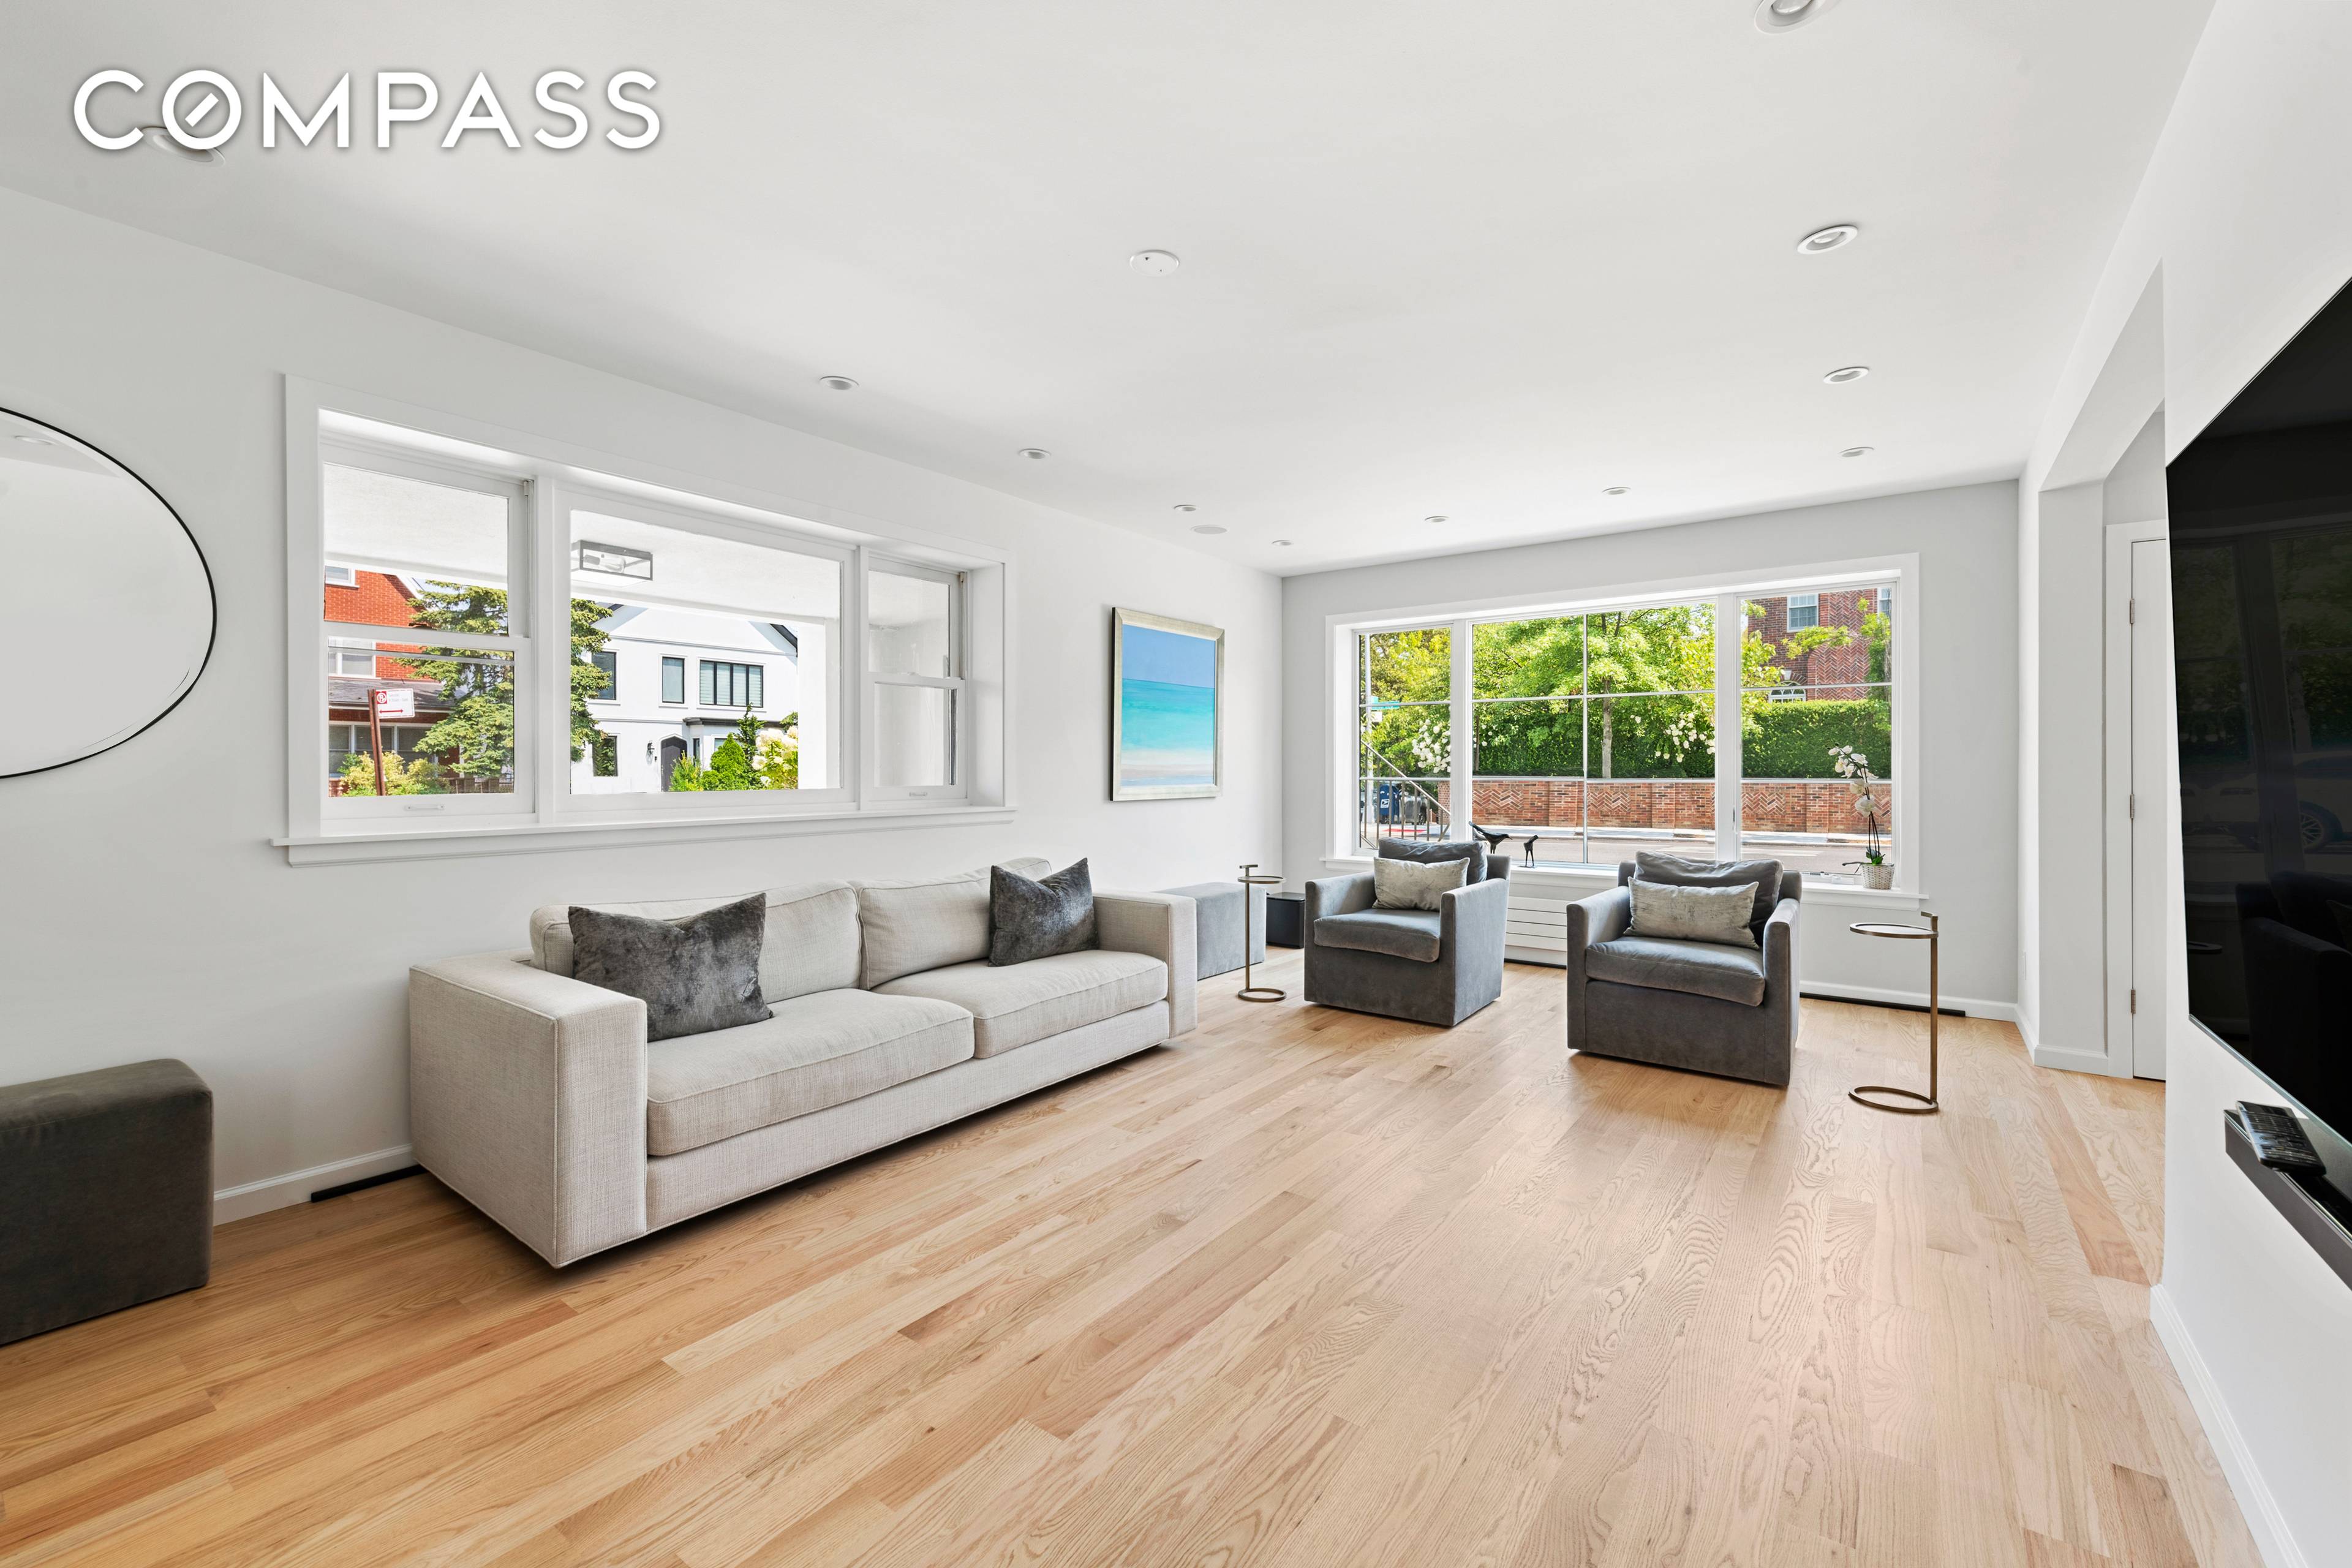 Discover exceptional indoor outdoor luxury living in this one of a kind newly renovated soft modern Mediterranean showplace, beautifully situated on Bay Ridge s most coveted block Harbor View Terrace.